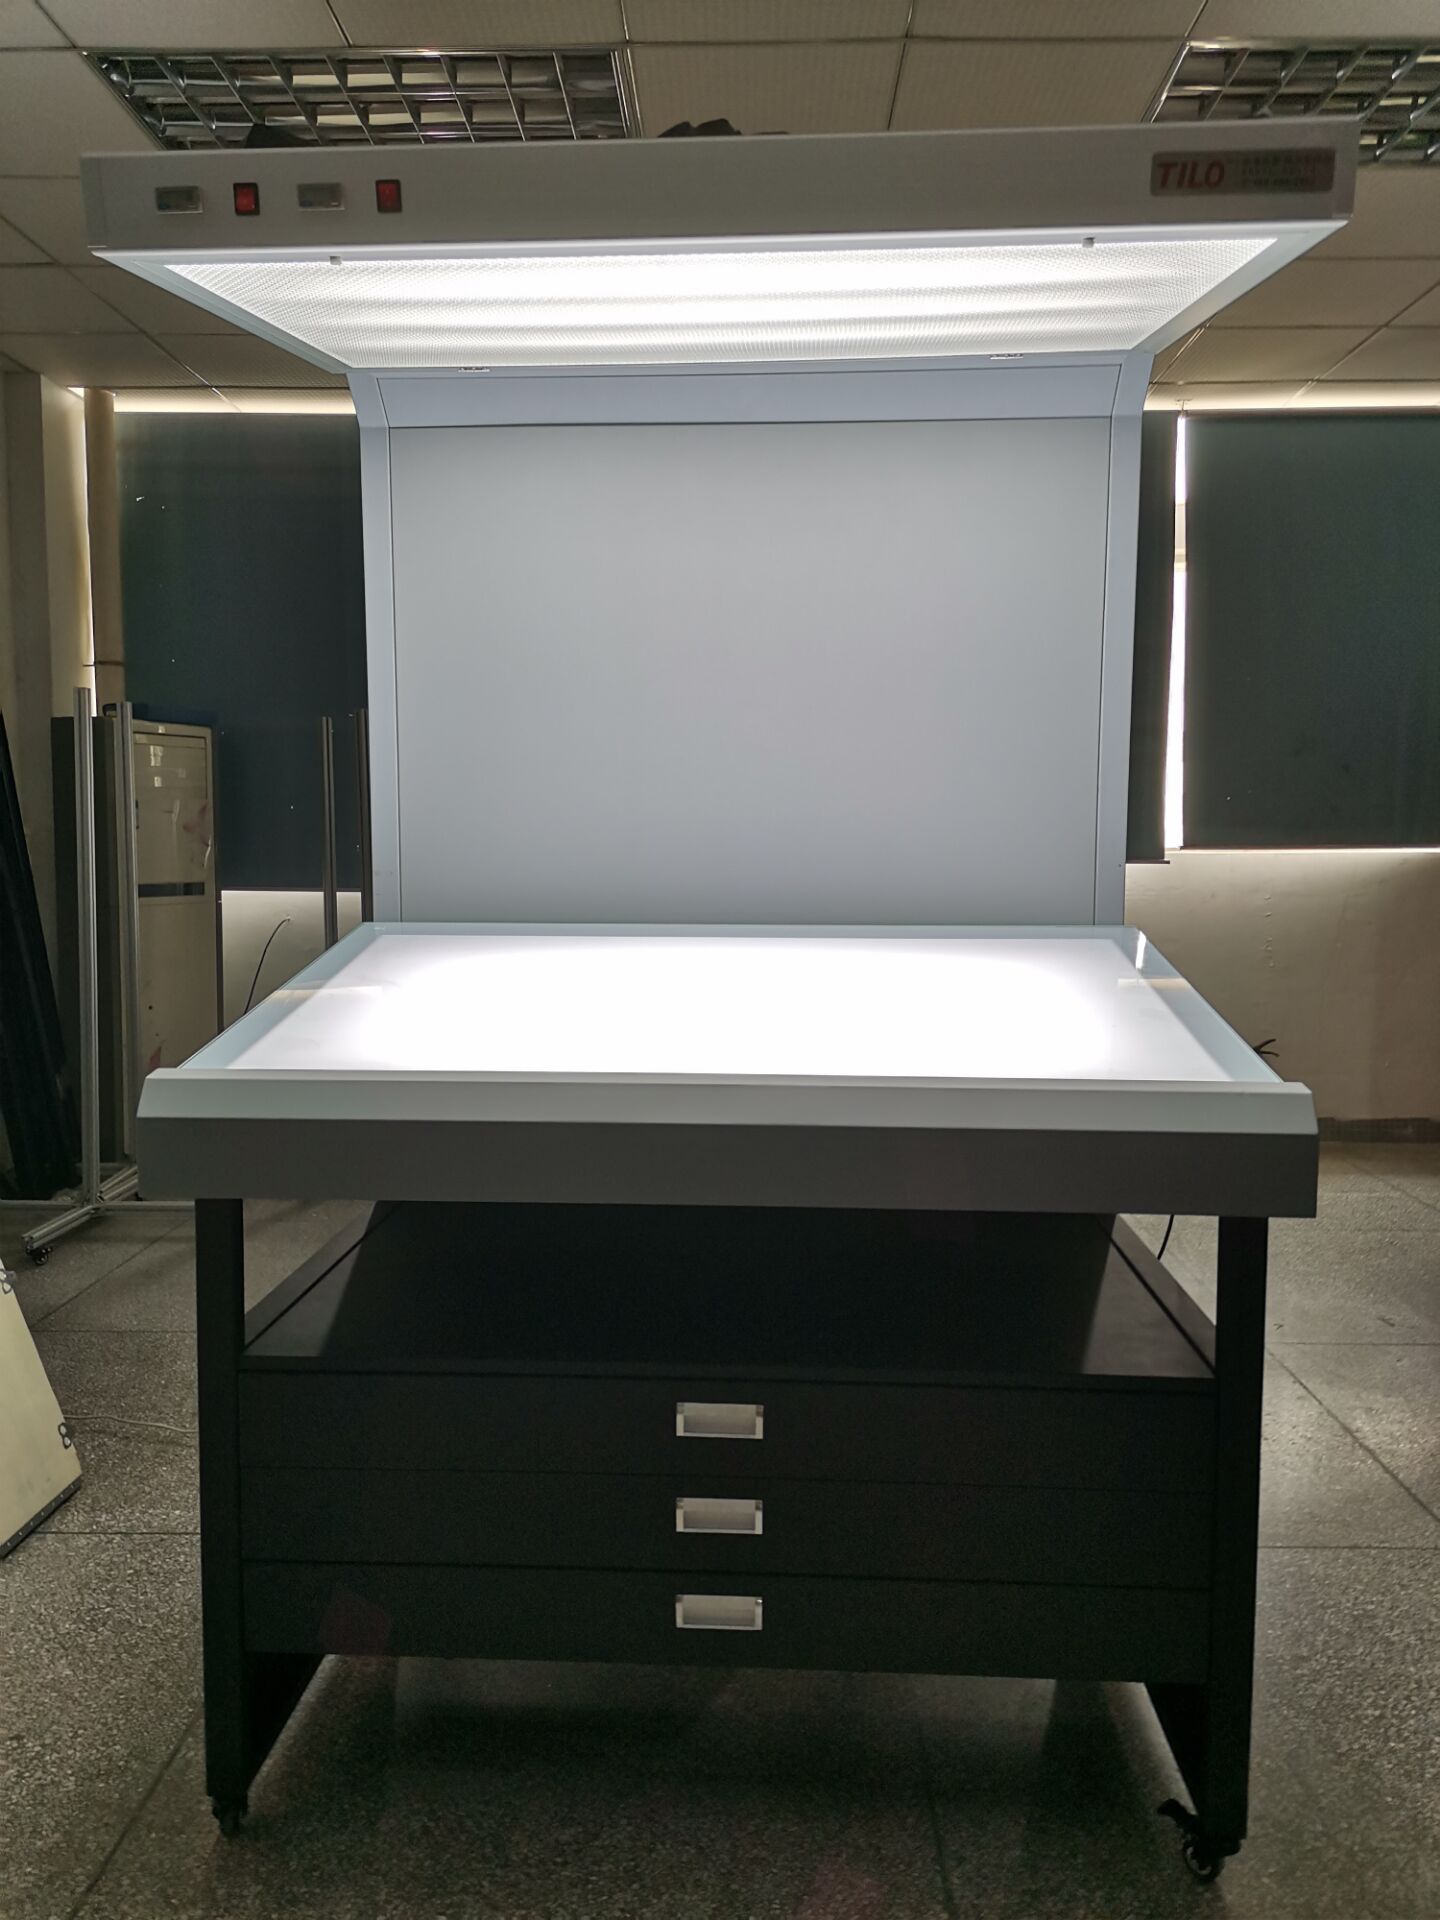 tilo cc120 color proof table color light box for package printing industry with 3 light sources optional D65, D50,U30